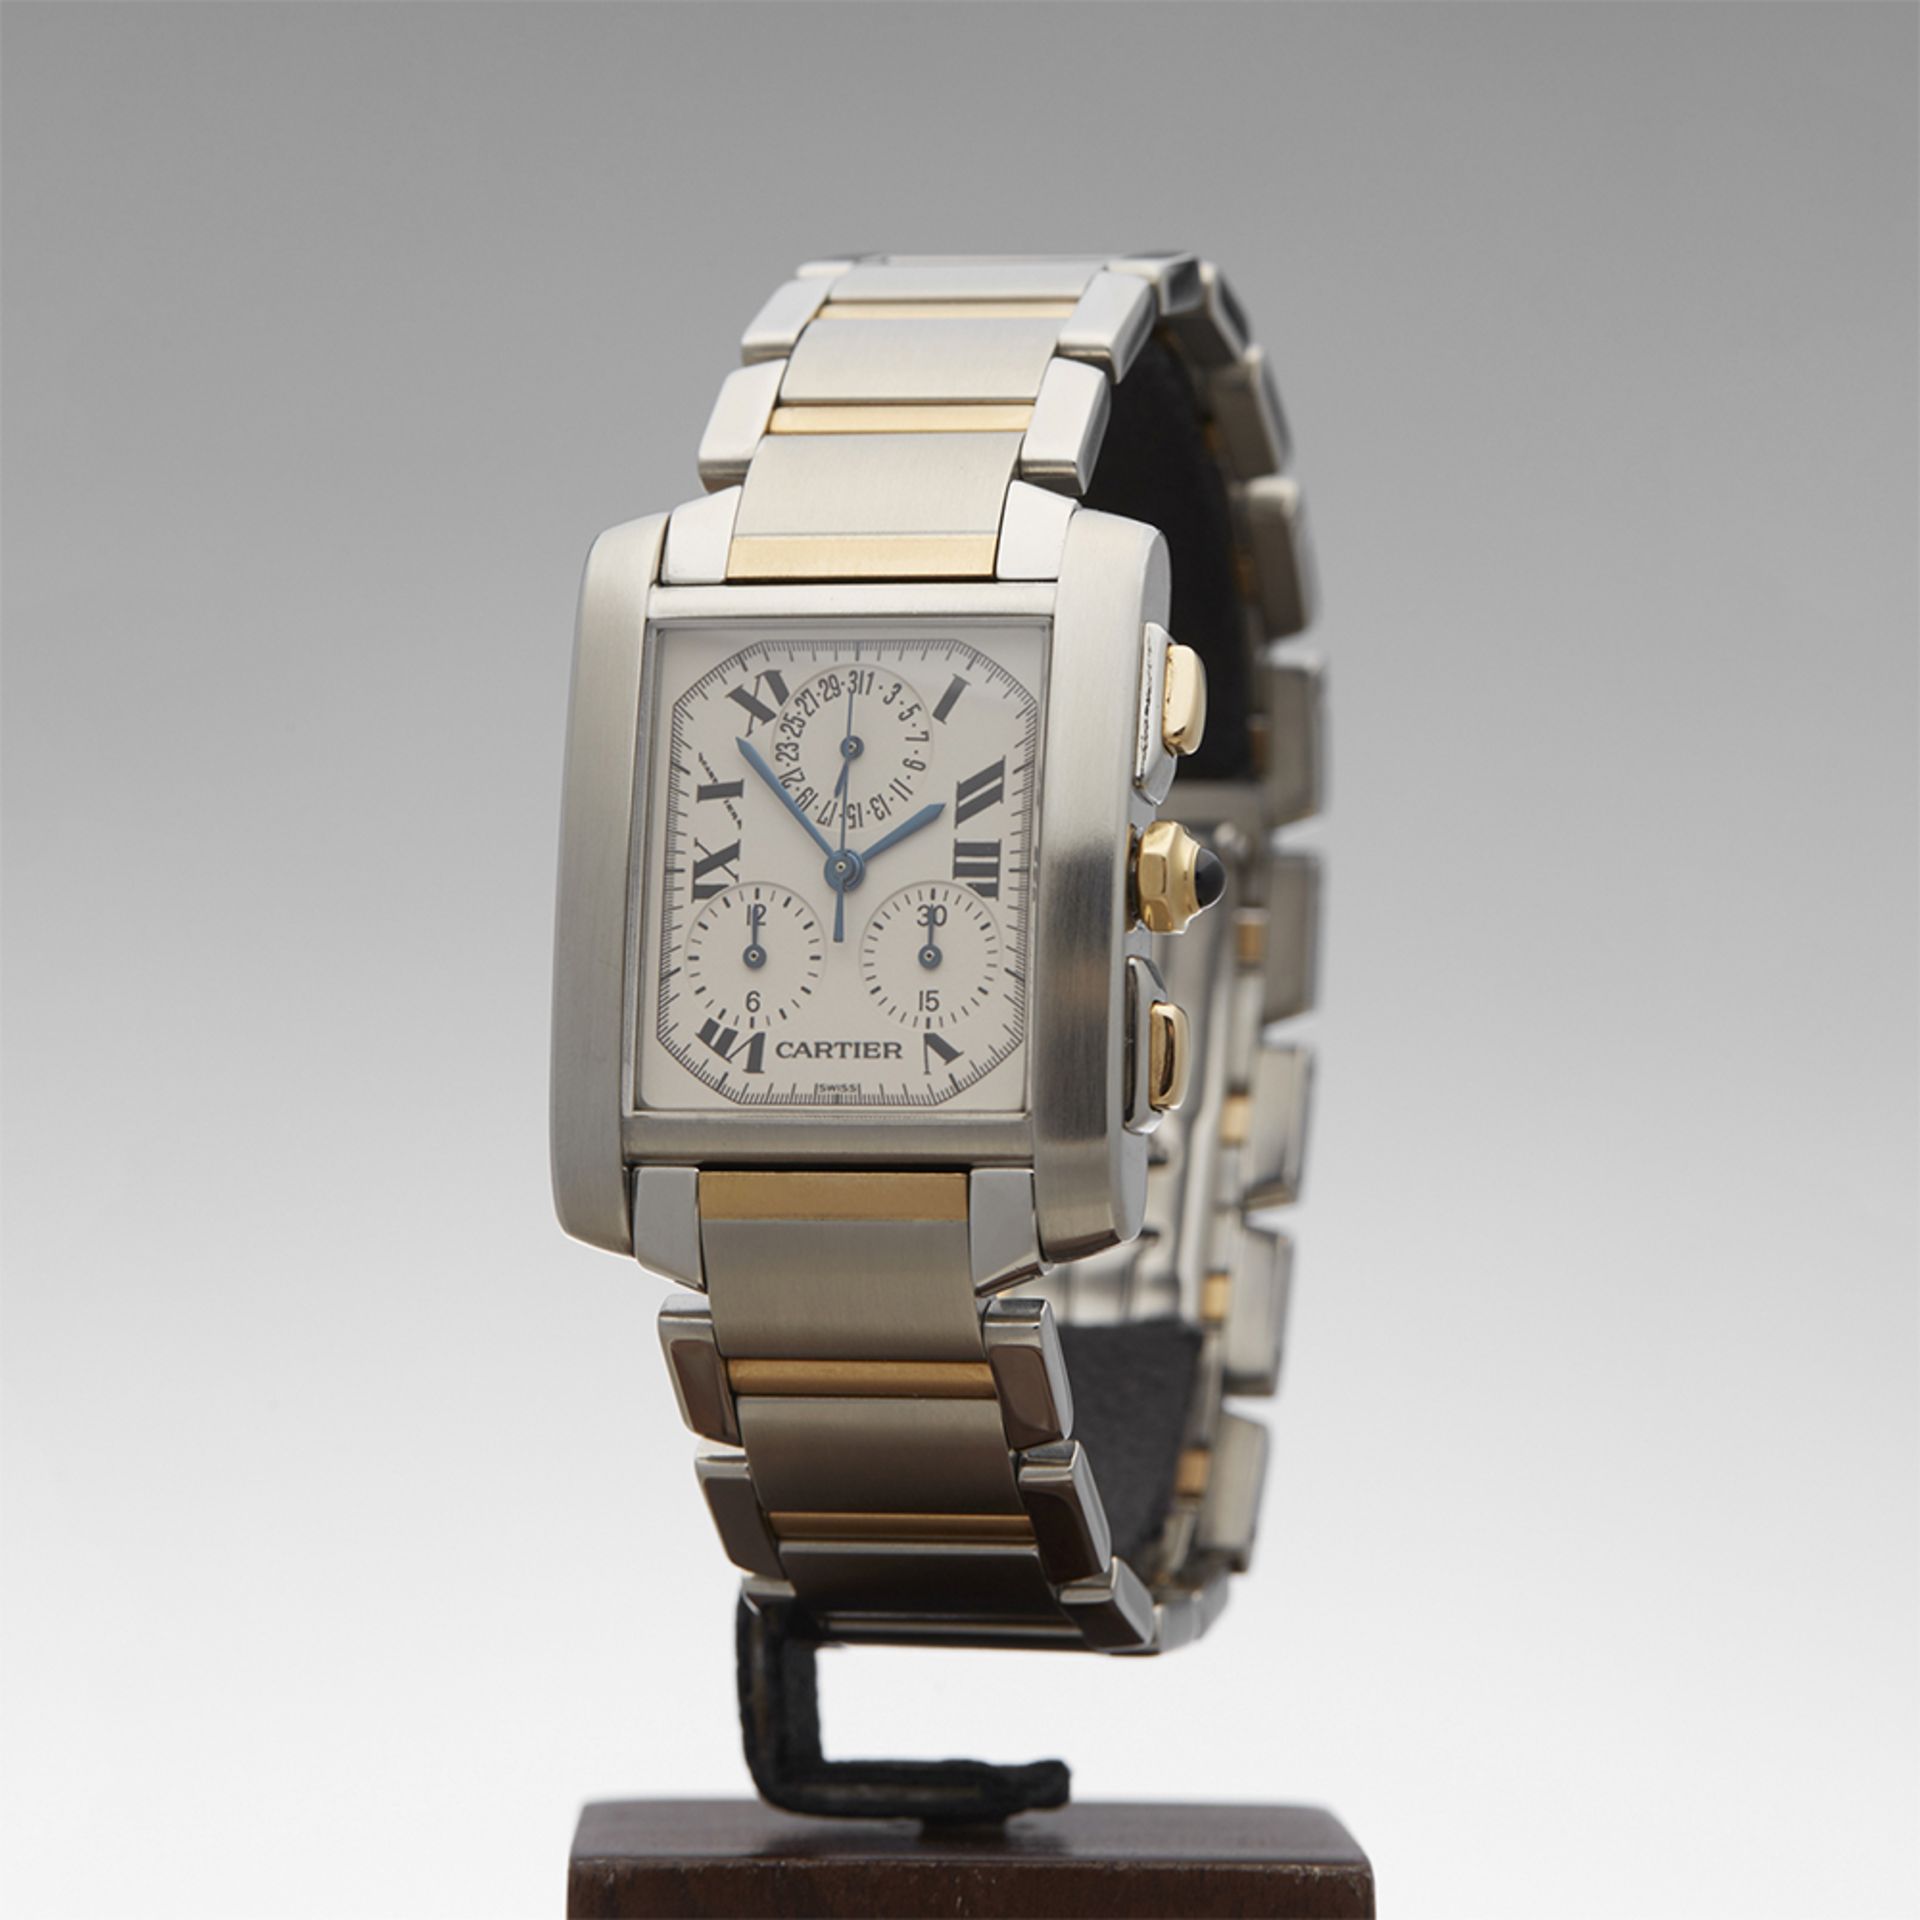 Cartier, Tank Francaise Chronoreflex 28mm Stainless Steel & 18k Yellow Gold 2303 or W51004Q4 - Image 3 of 9